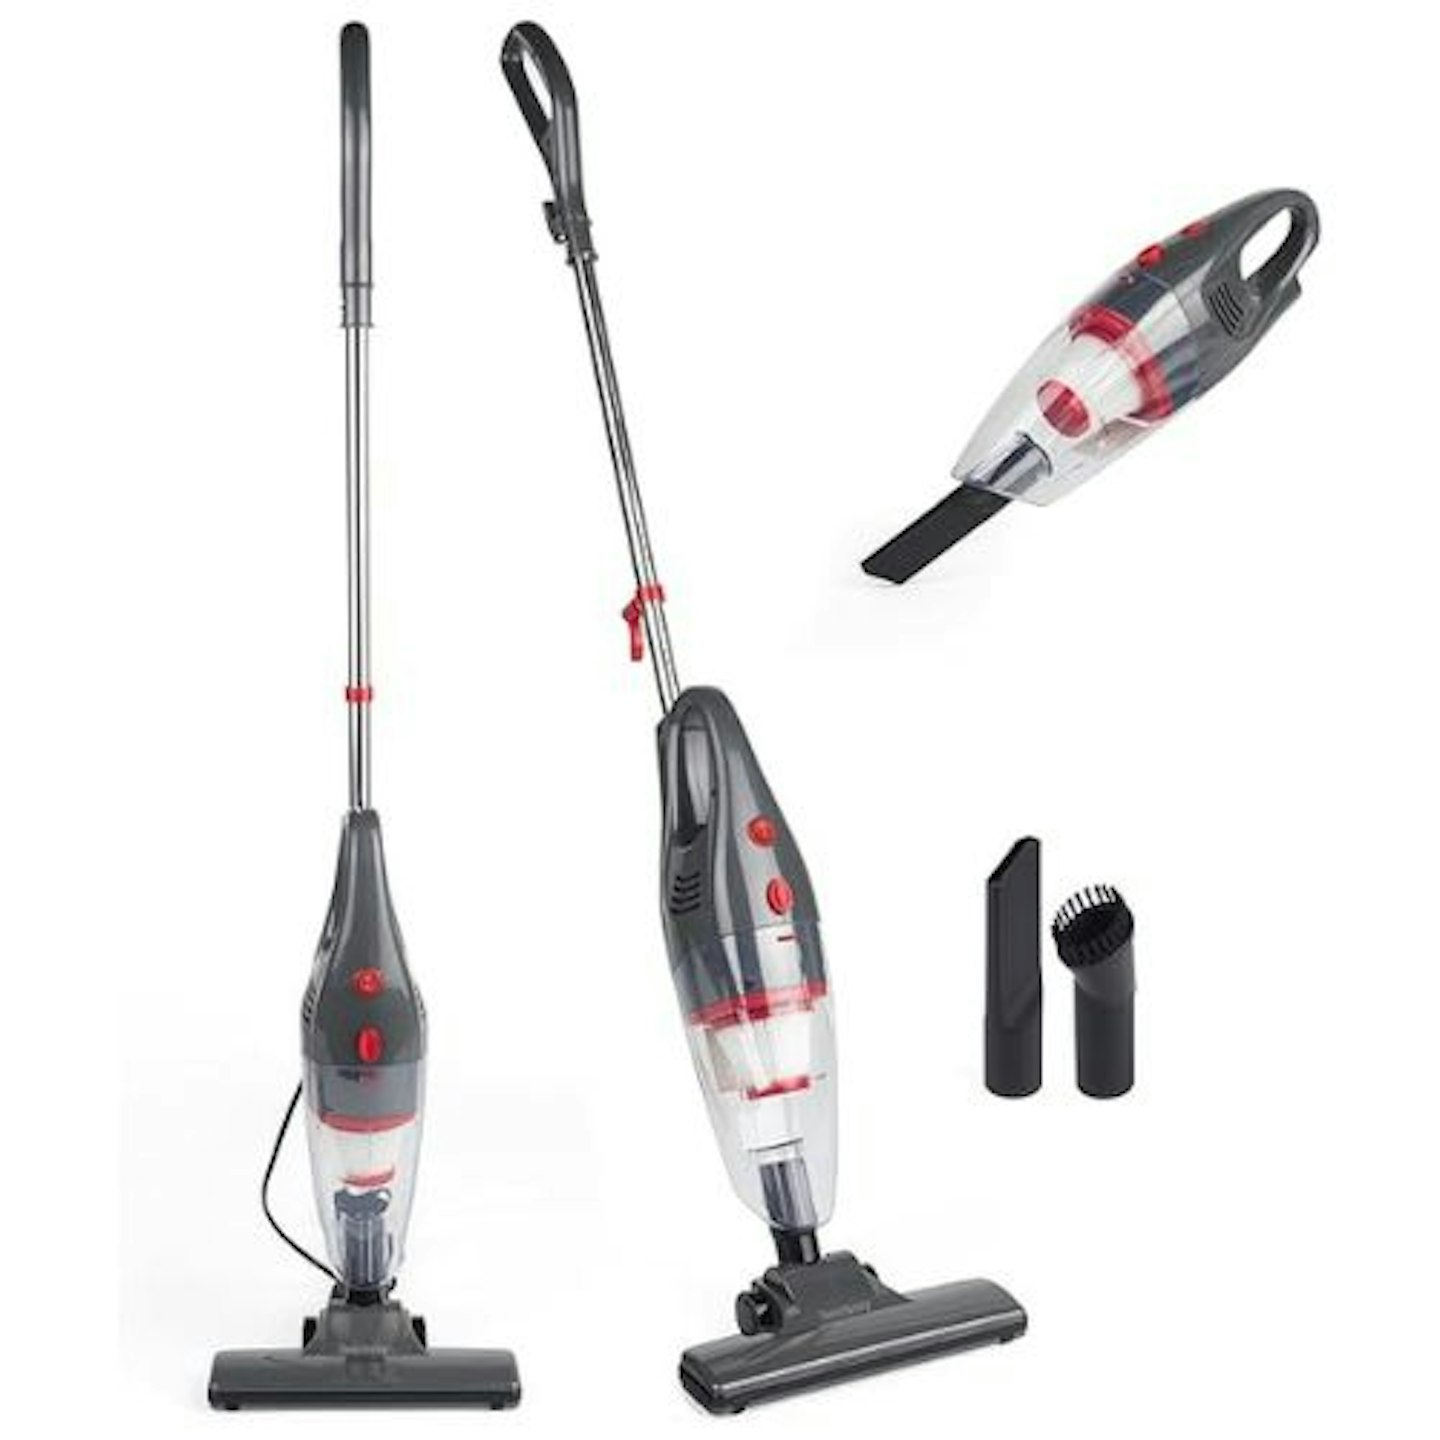 Beldray BEL0770N-GRY 2-in-1 Upright Stick Vacuum Cleaner